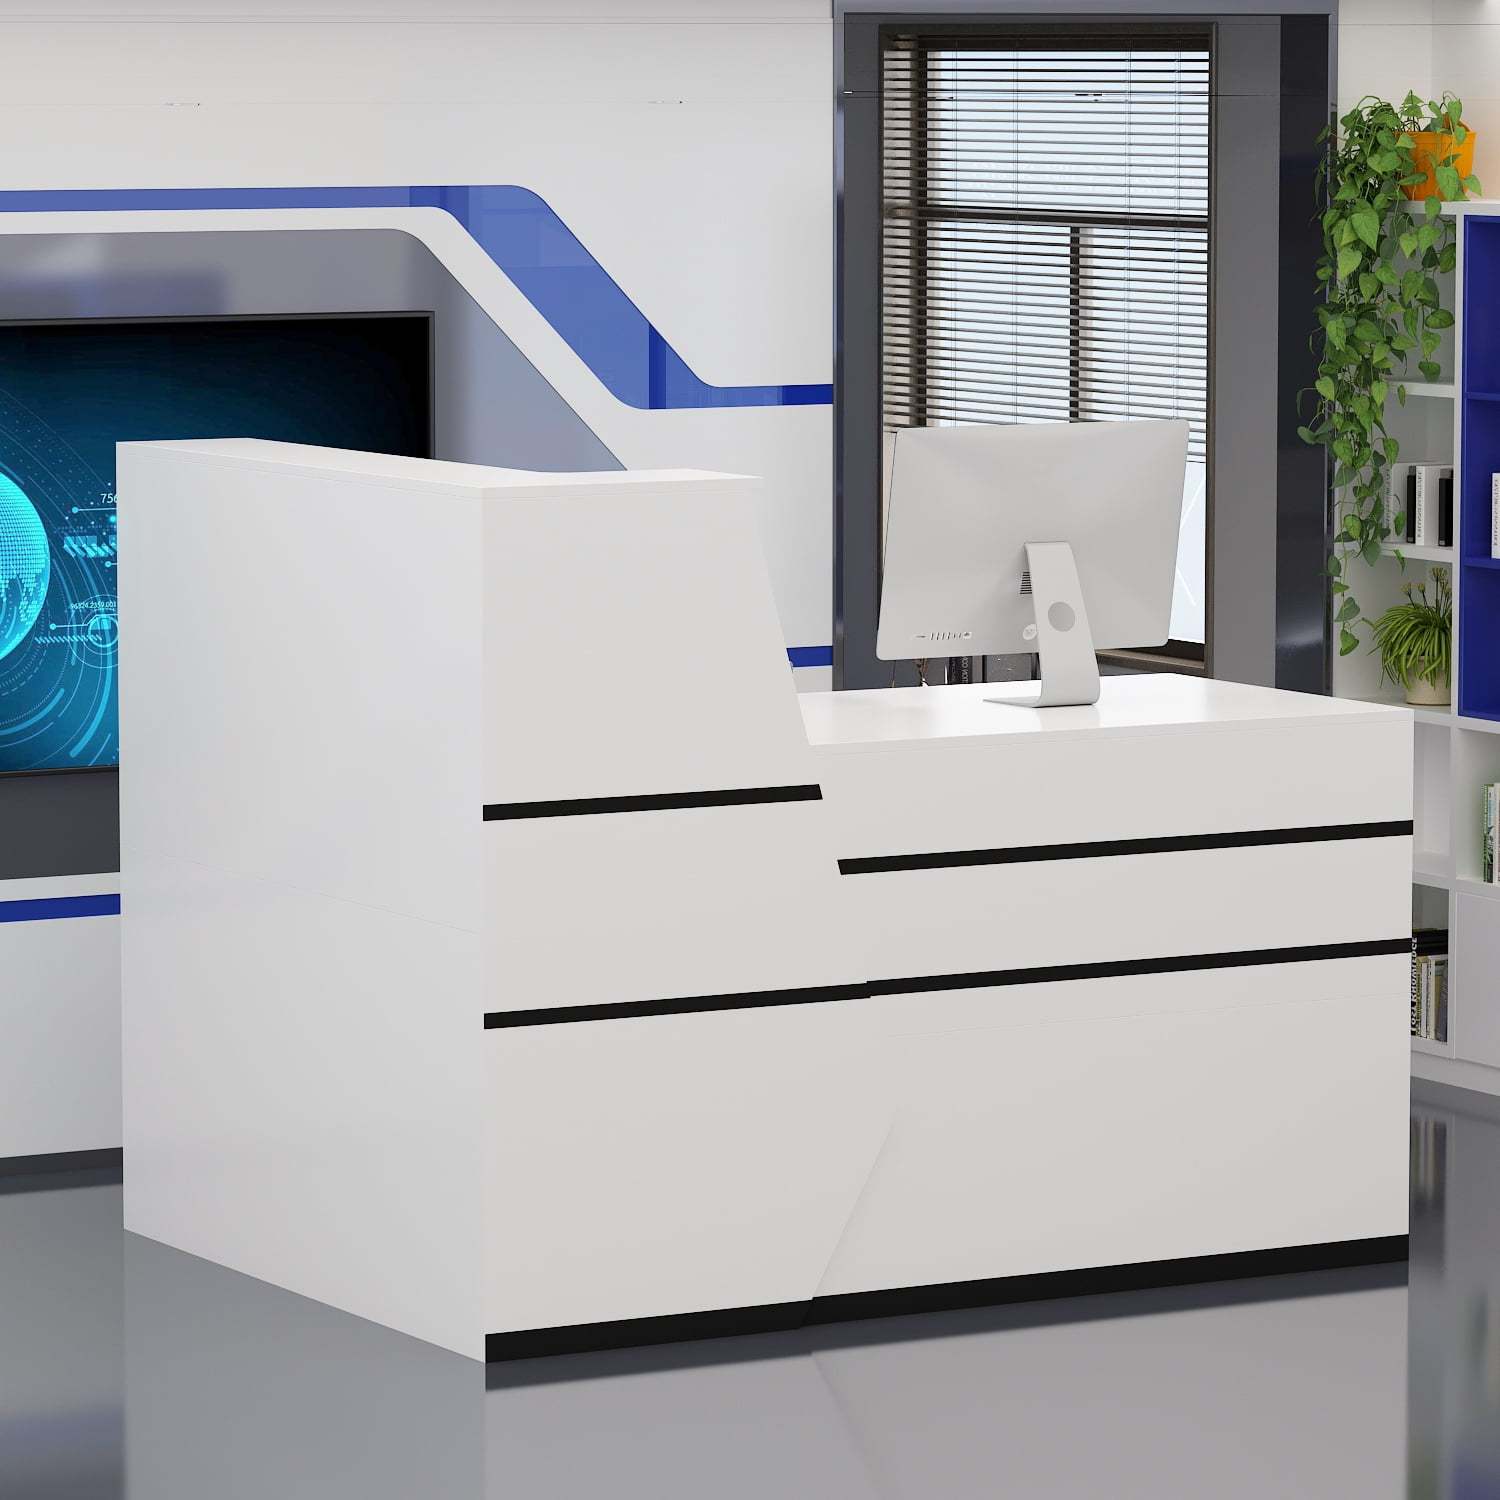 

L-shaped Reception Desk, 55 Inch Office White Computer Desk With Open Shelves, Locked Drawer And Storage Cabinet